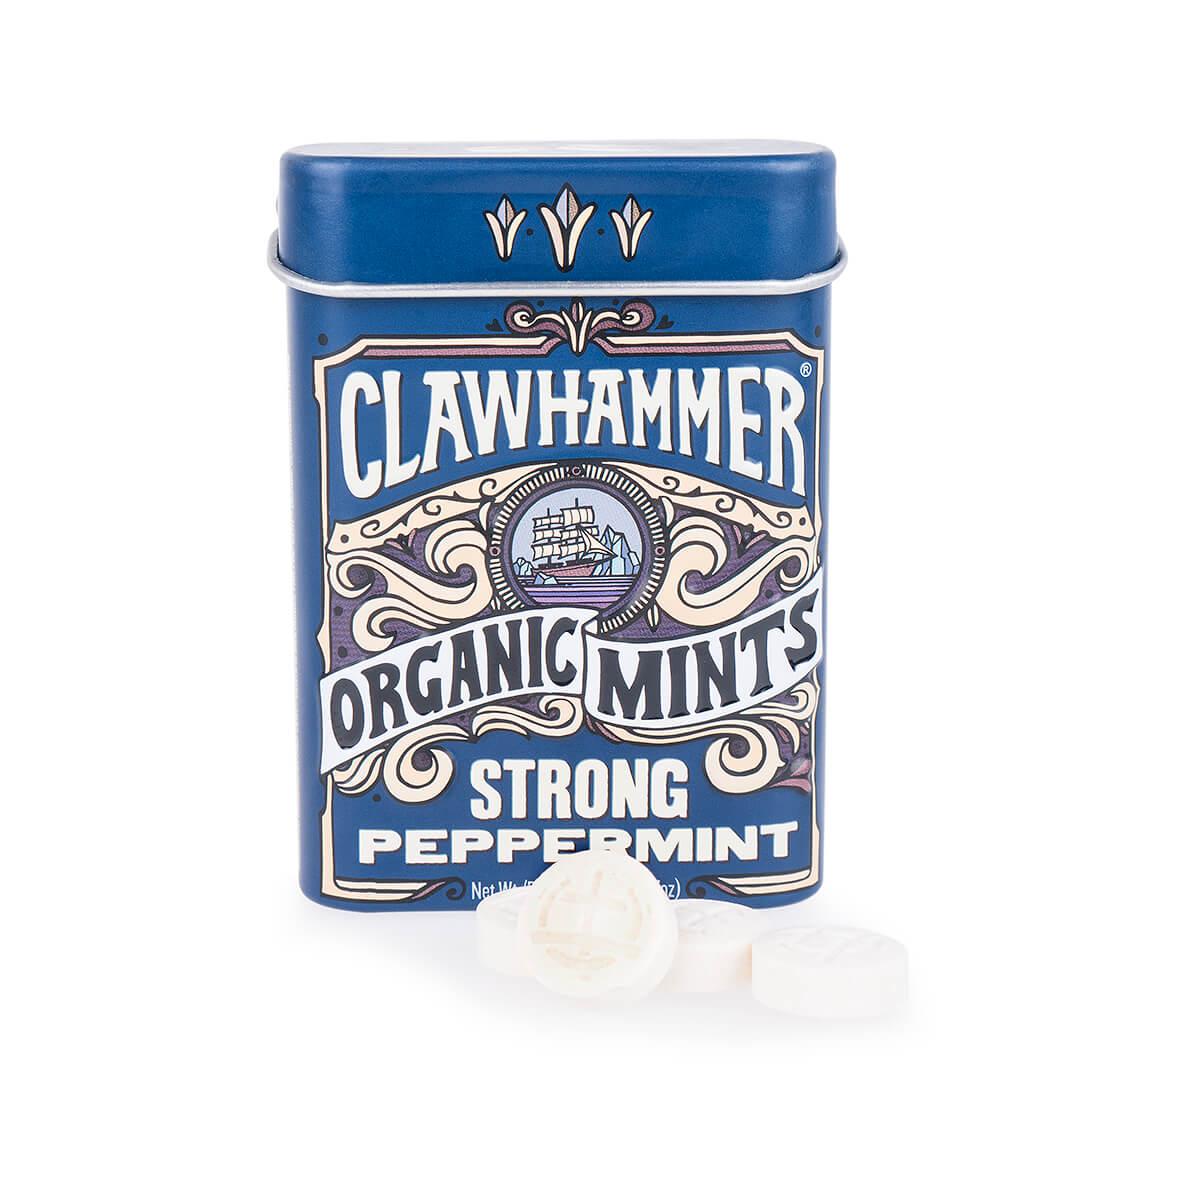  Clawhammer Peppermint Organic Mints